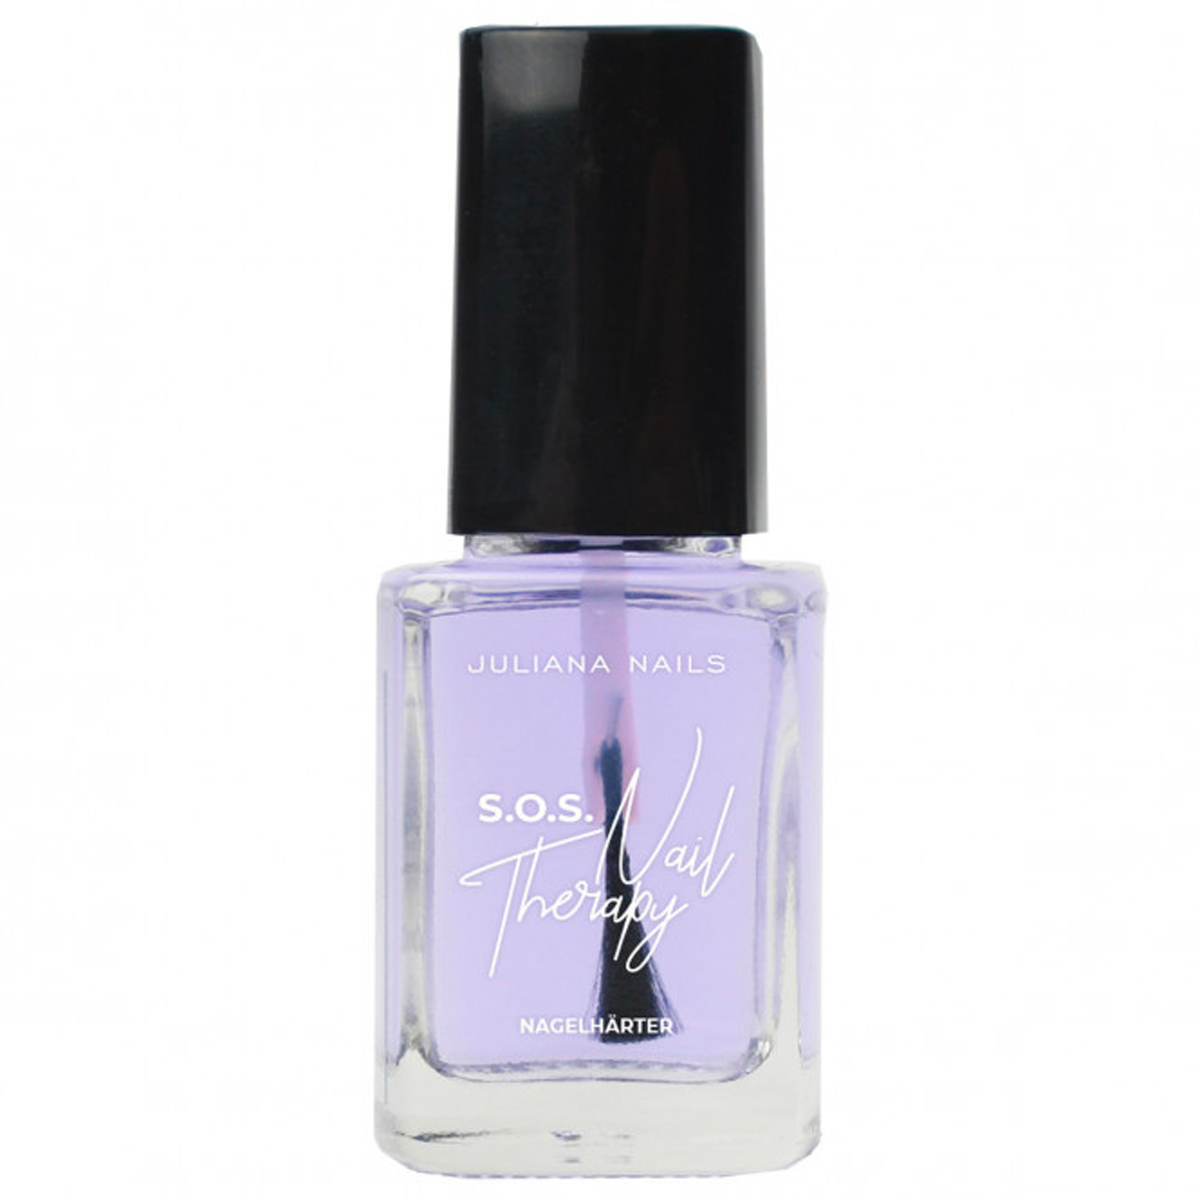 Durcisseur d'Ongle S.O.S. Nail Therapy Juliana Nails 10 ML